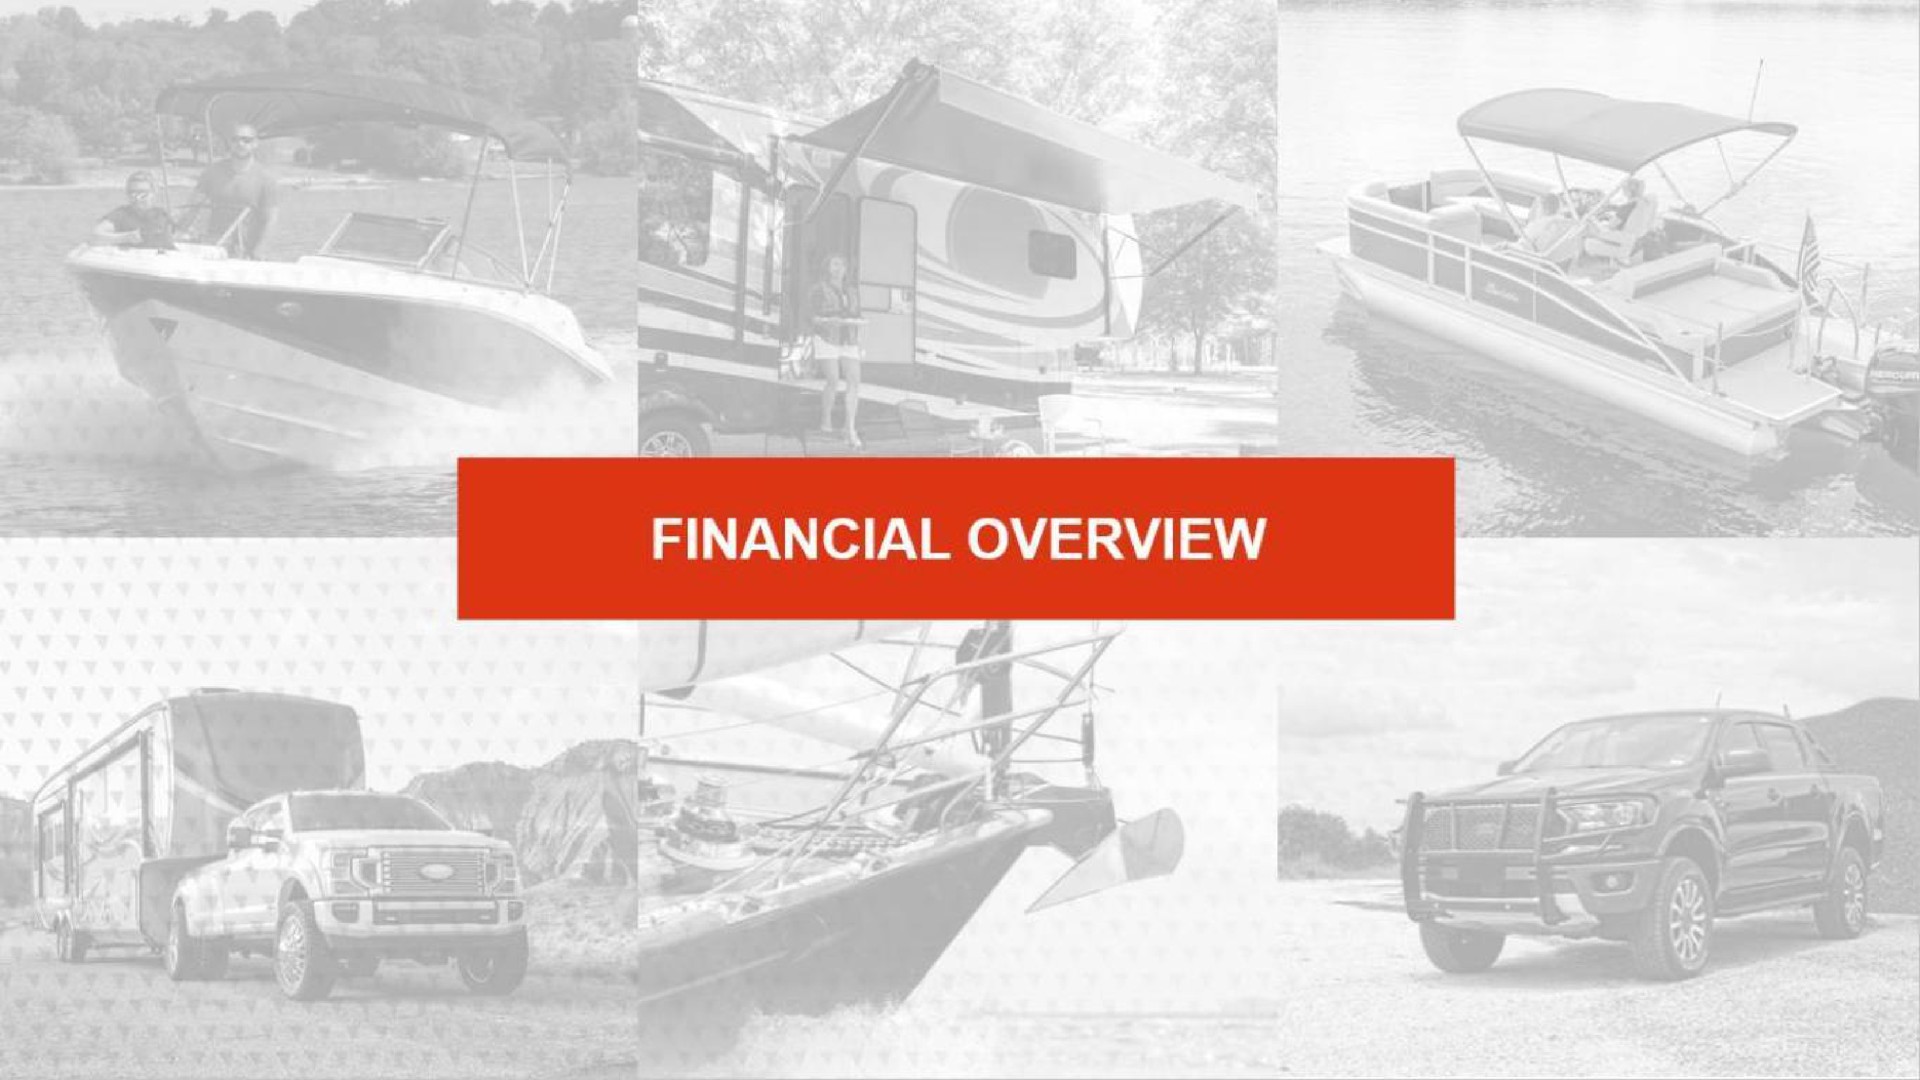 financial overview | LCI Industries